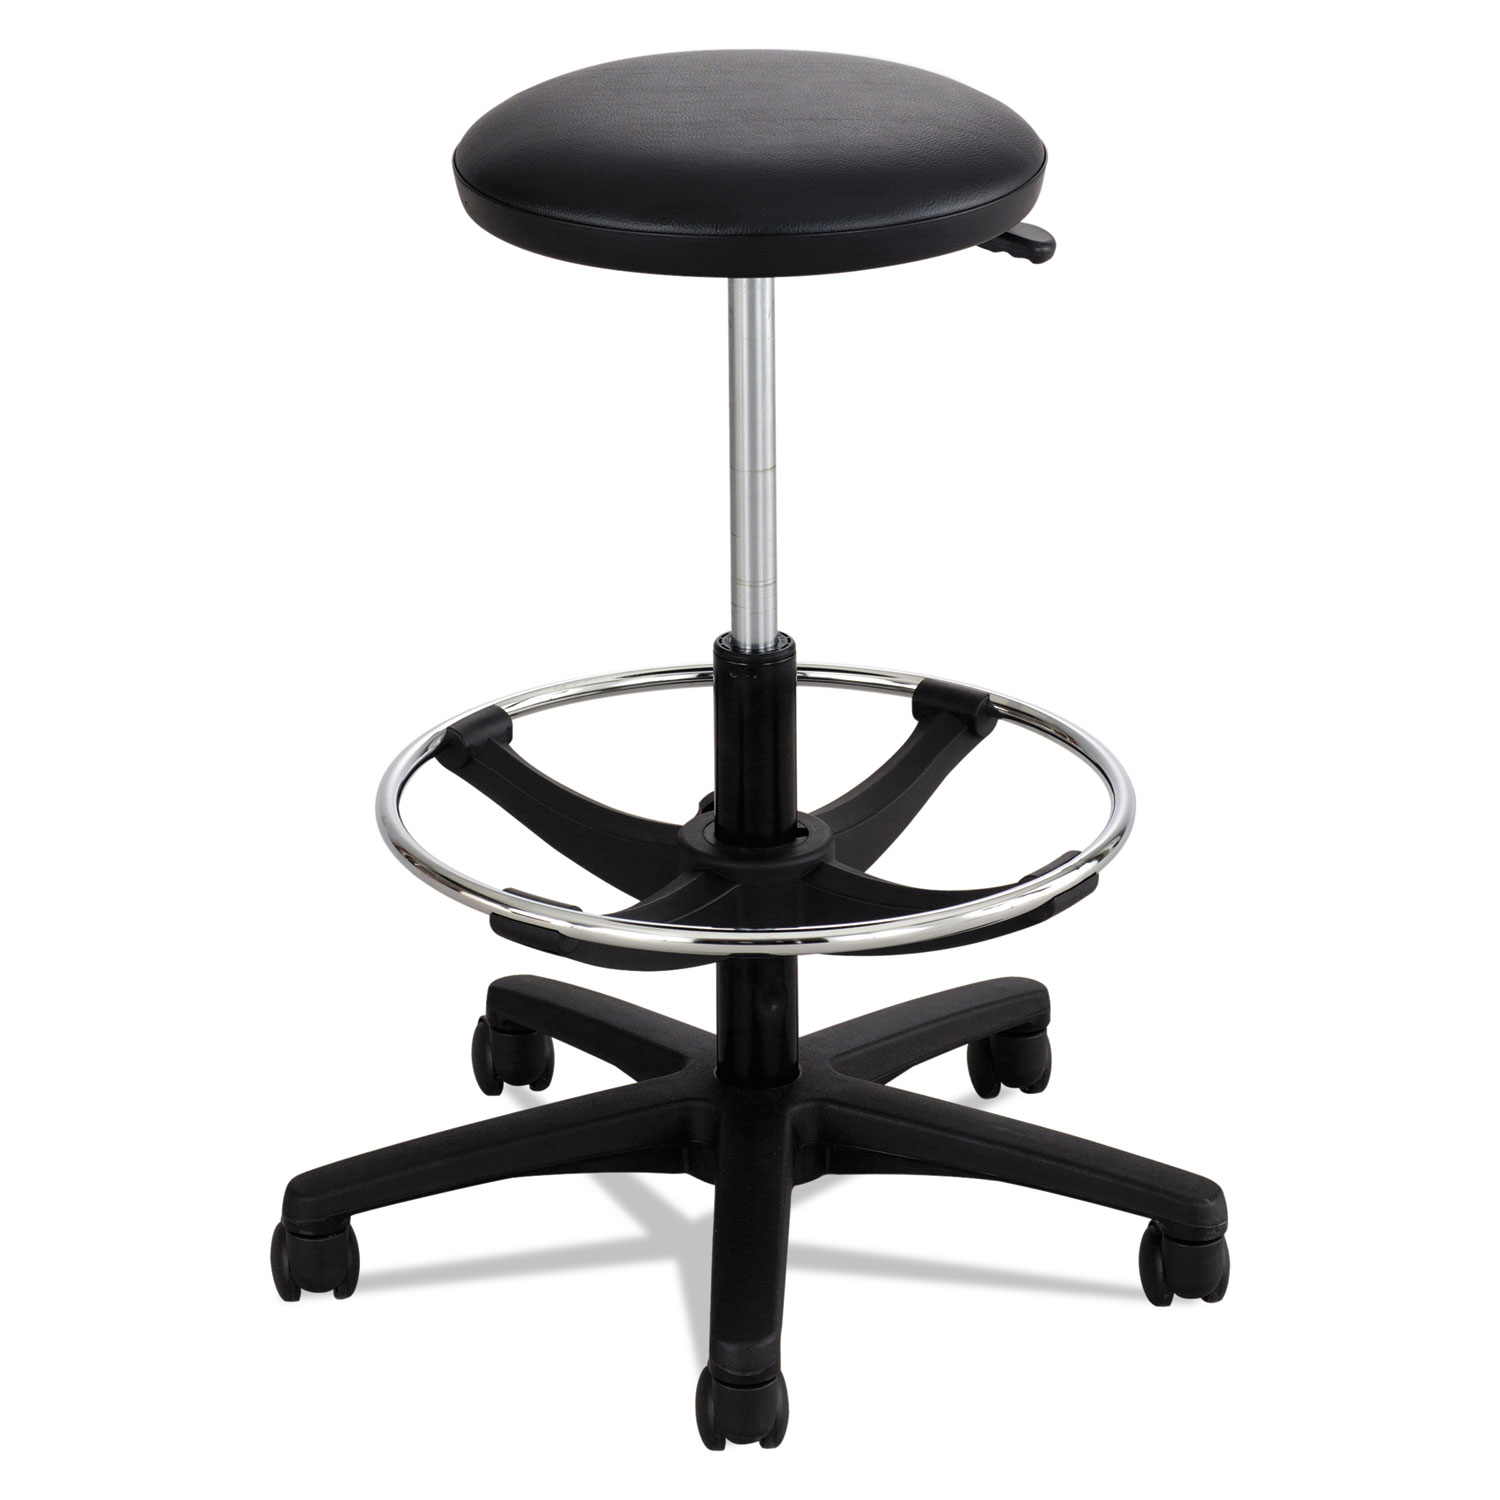 Safco SoftSpot Lumbar Roll Backrest for Adjusts to Fit any chair –